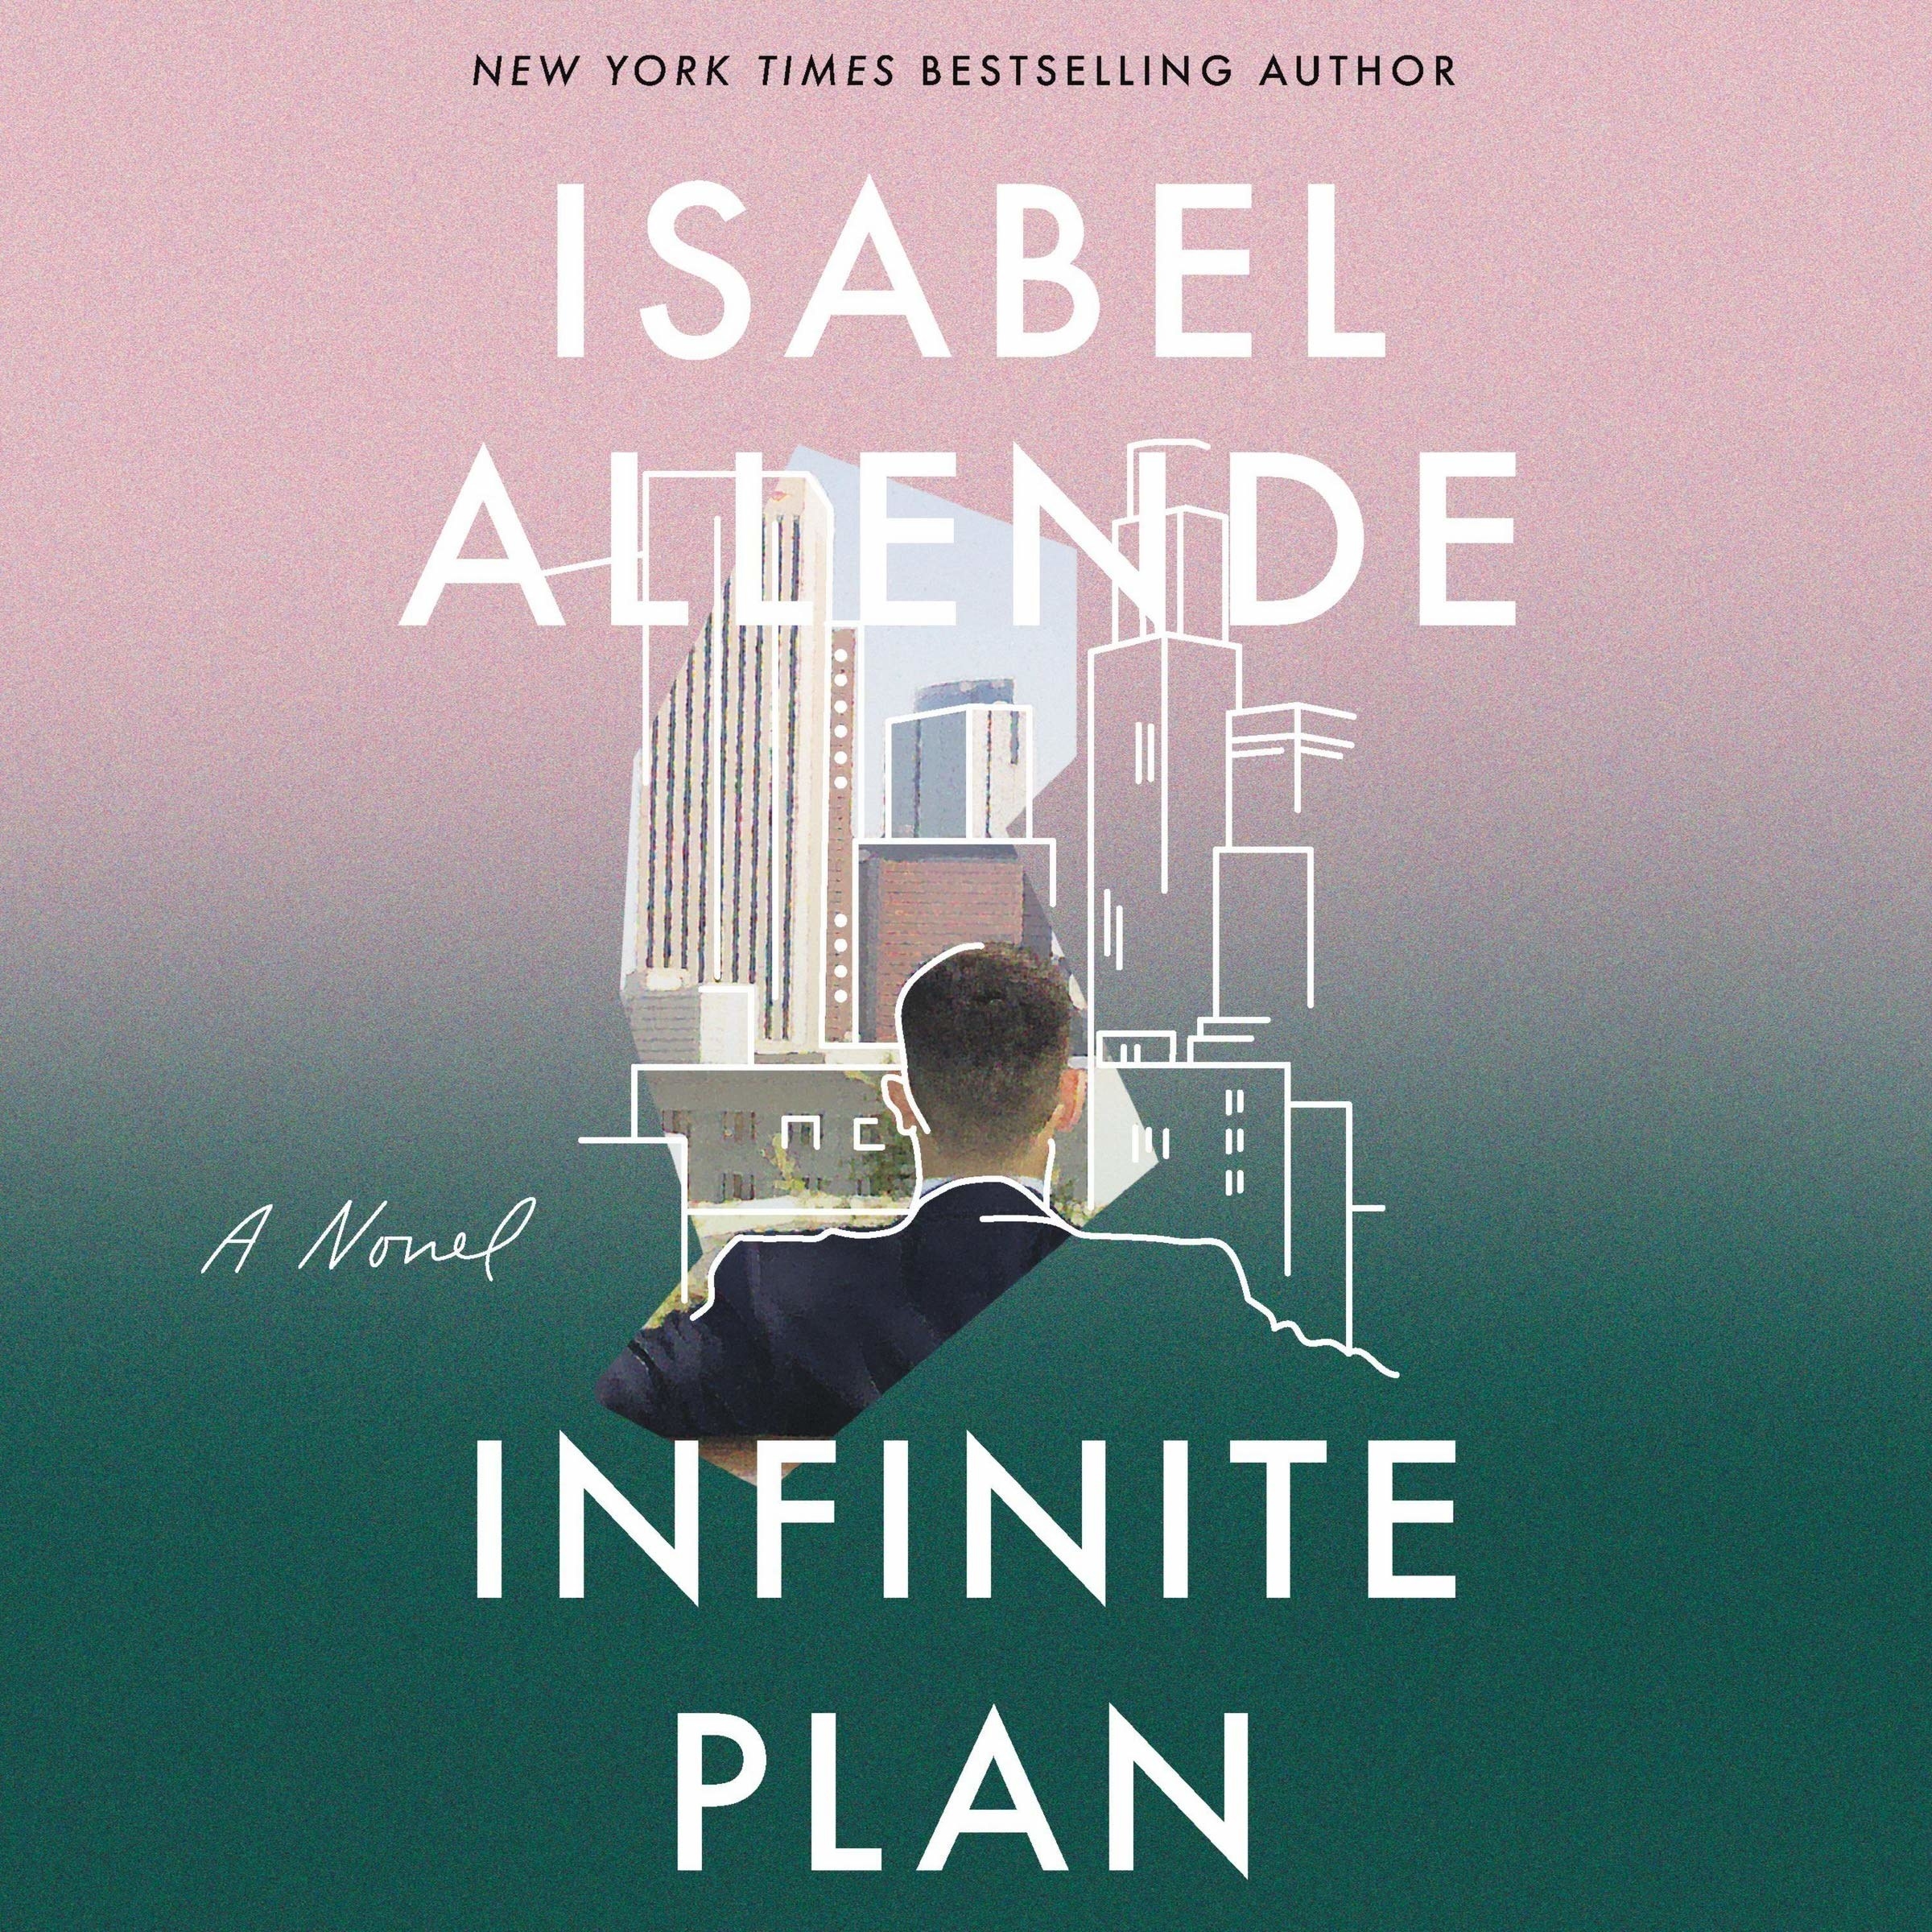 &quot;The Infinite Plan by Isabel Allende